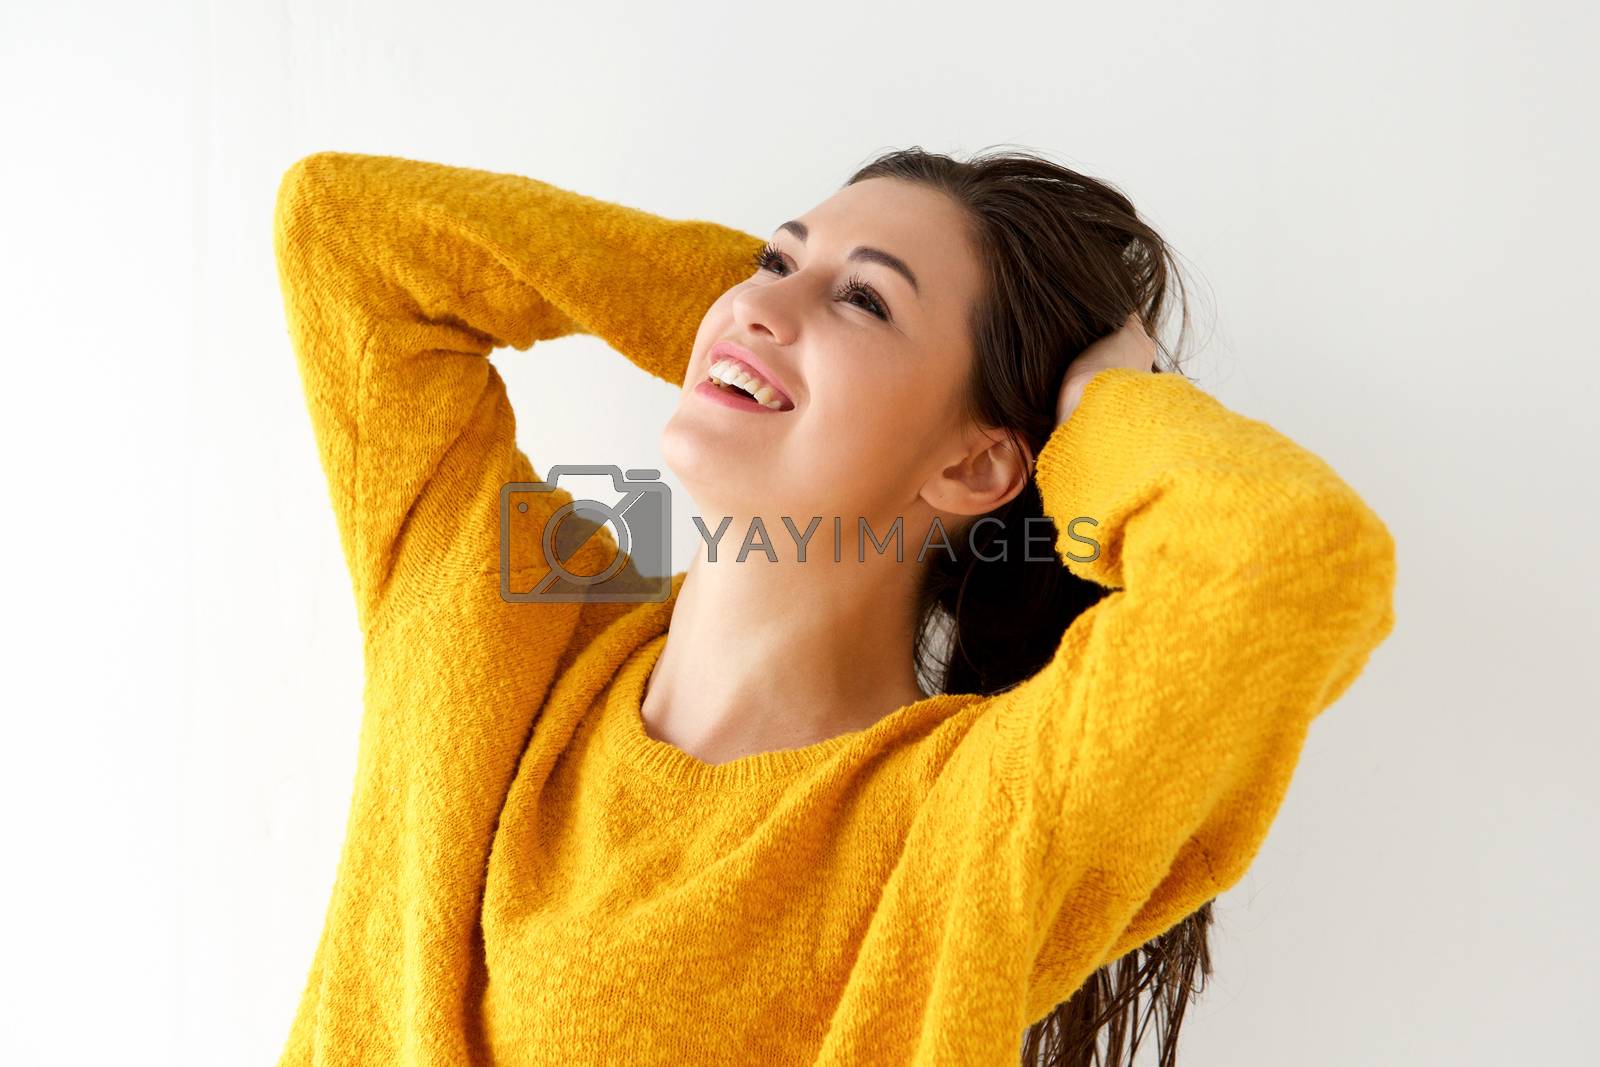 Royalty free image of Close up smiling young woman with hands behind head and looking up by mimagephotography